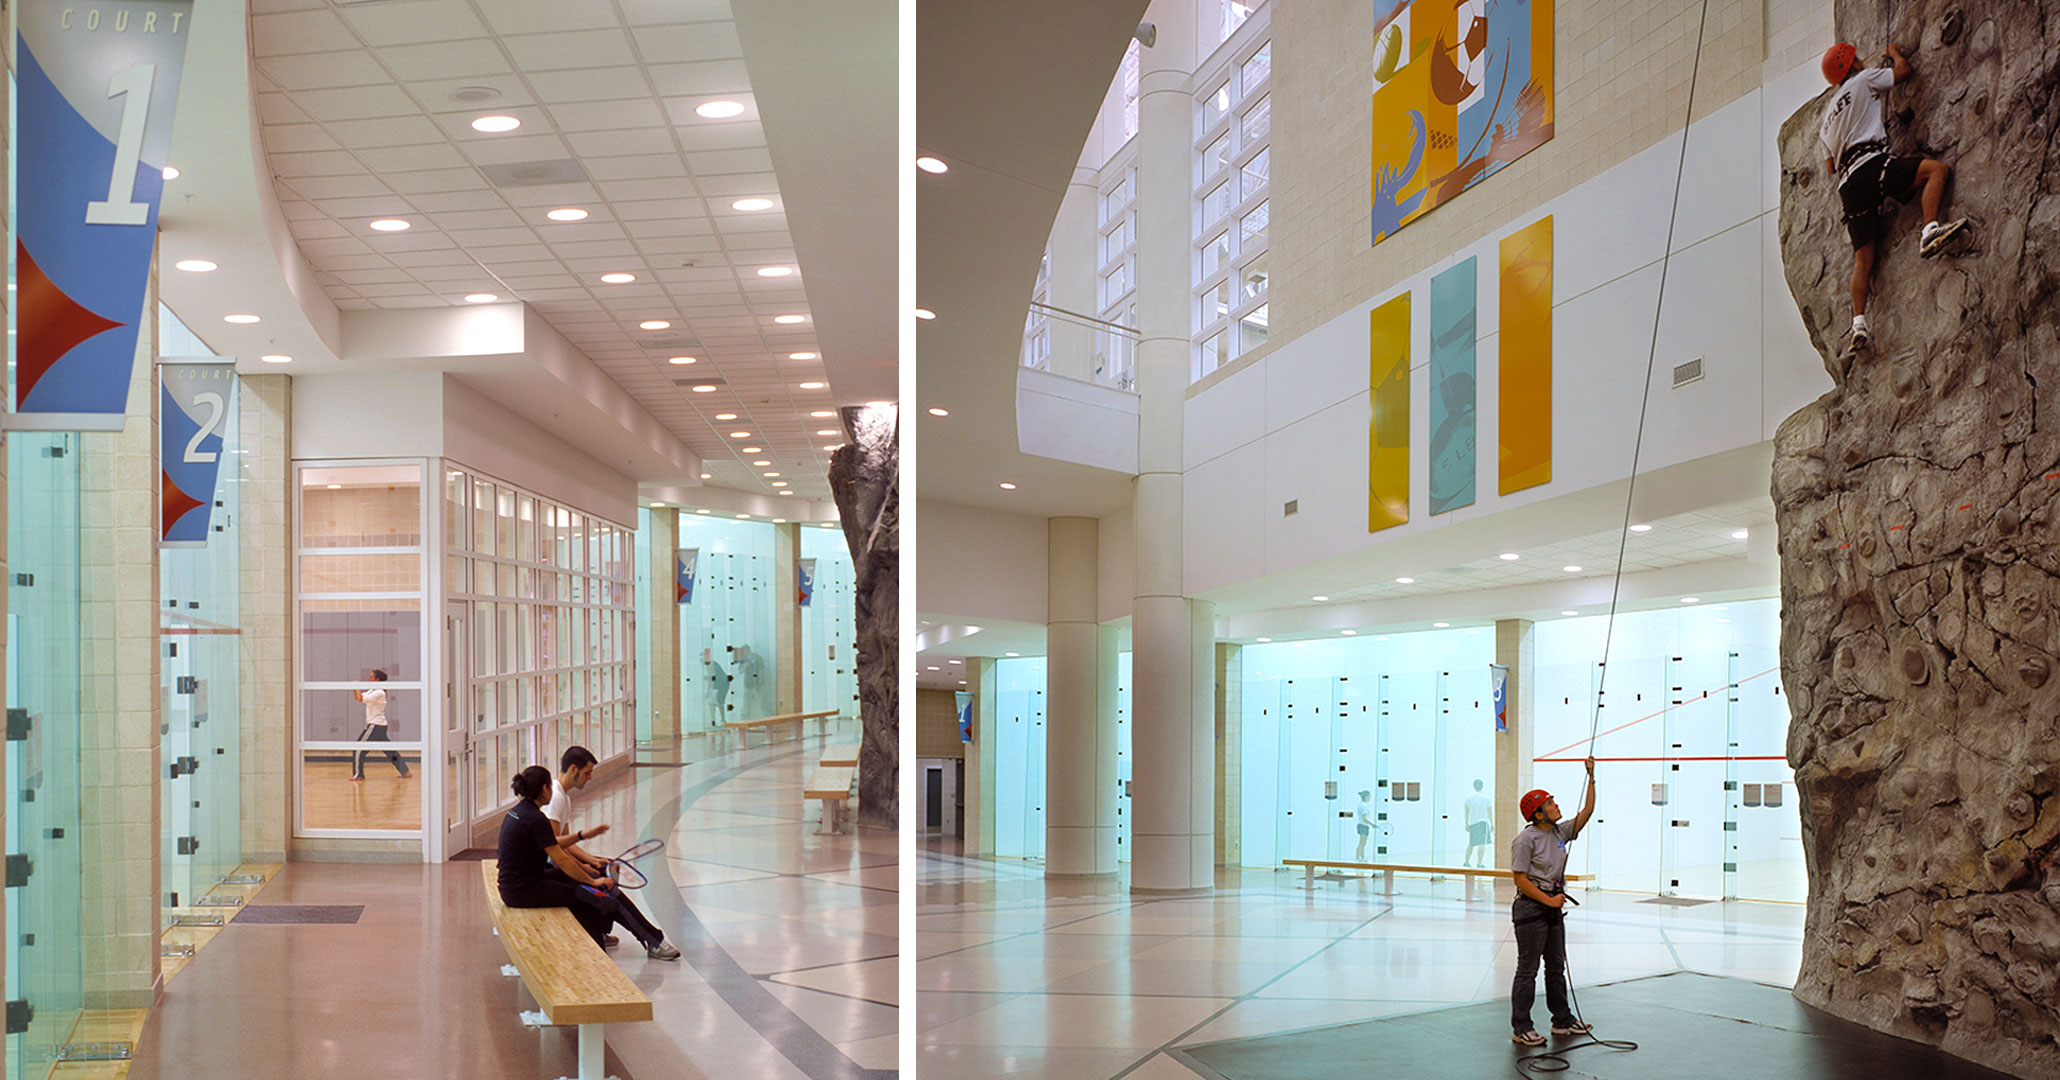 University of South Carolina worked with Boudreaux architects to design a climbing rock wall.